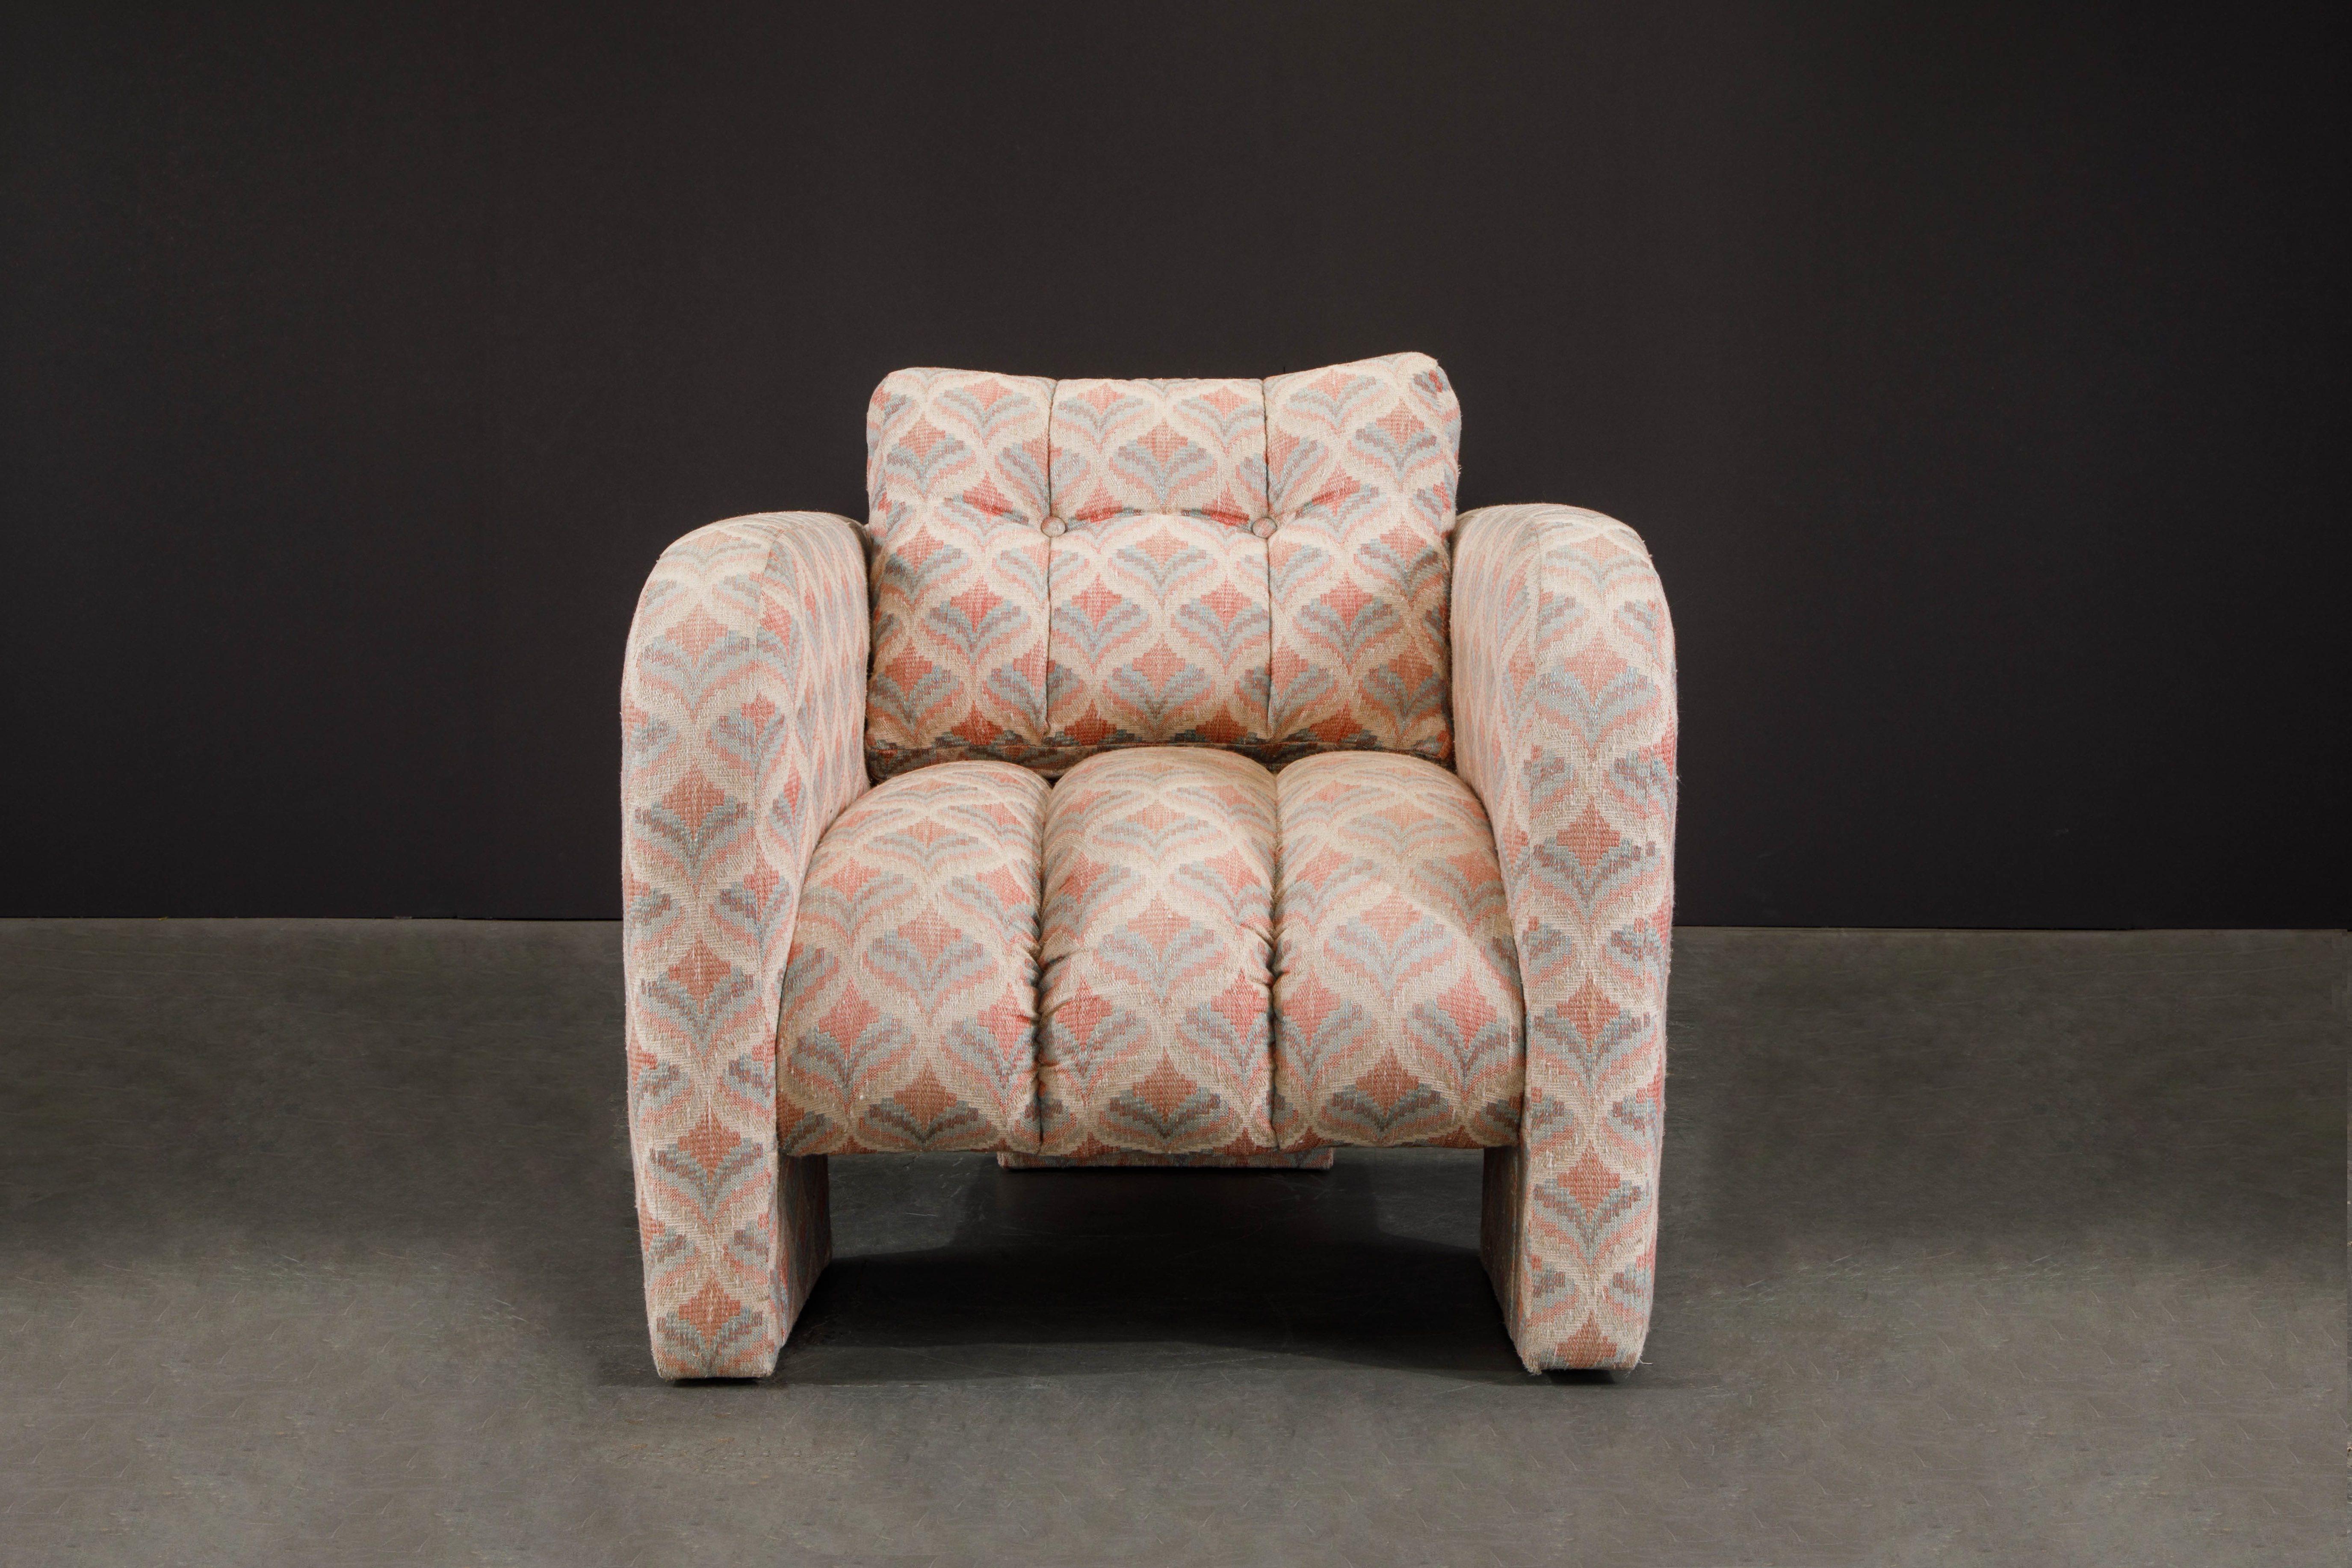 Post-Modern Channel Tufted Lounge Chairs, Attributed to Vladimir Kagan, 1980s For Sale 3